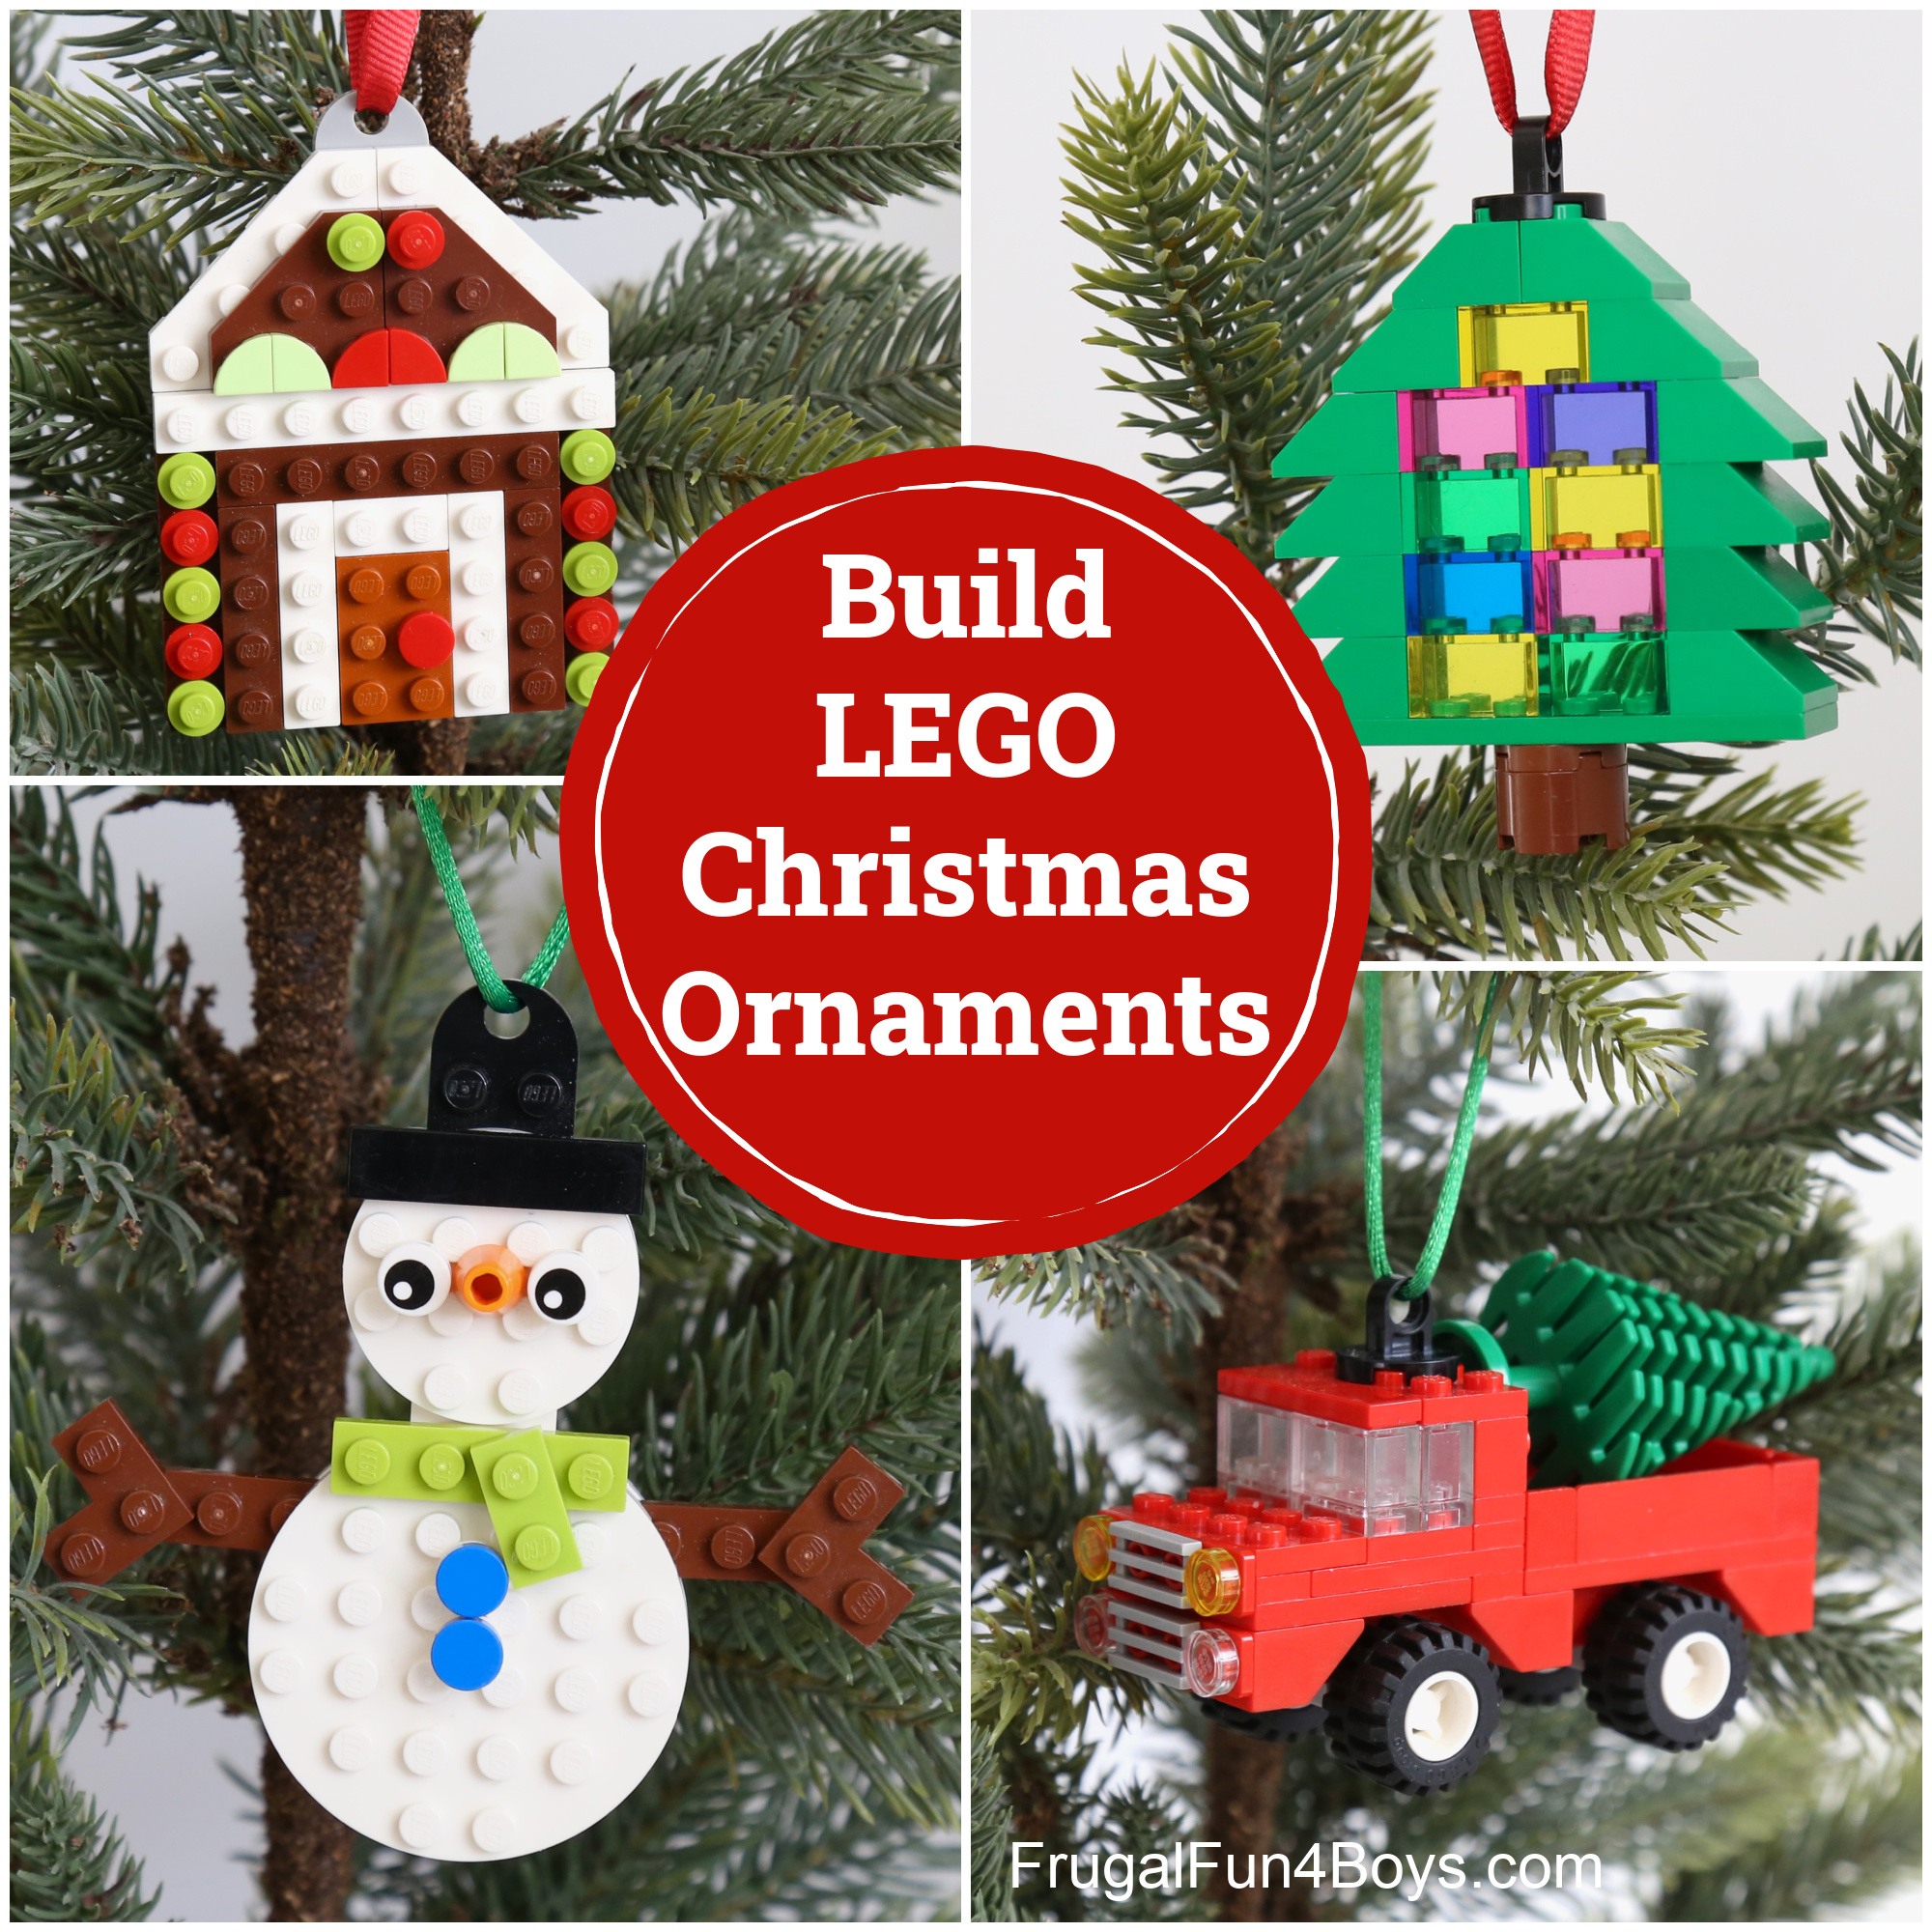 Build LEGO Christmas Ornaments - Frugal Fun For Boys and Girls